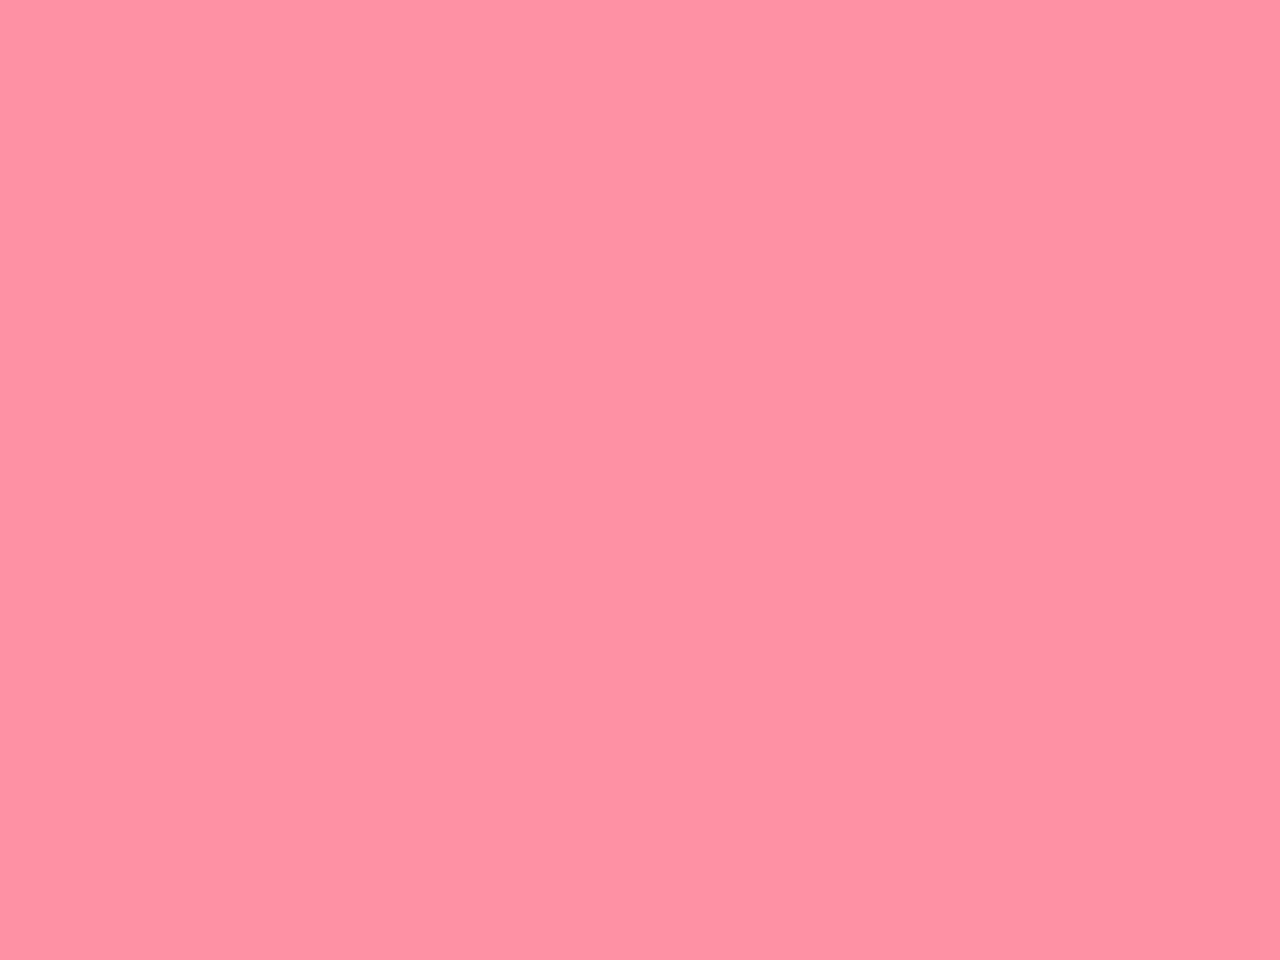 1280x960 Salmon Pink Solid Color Background